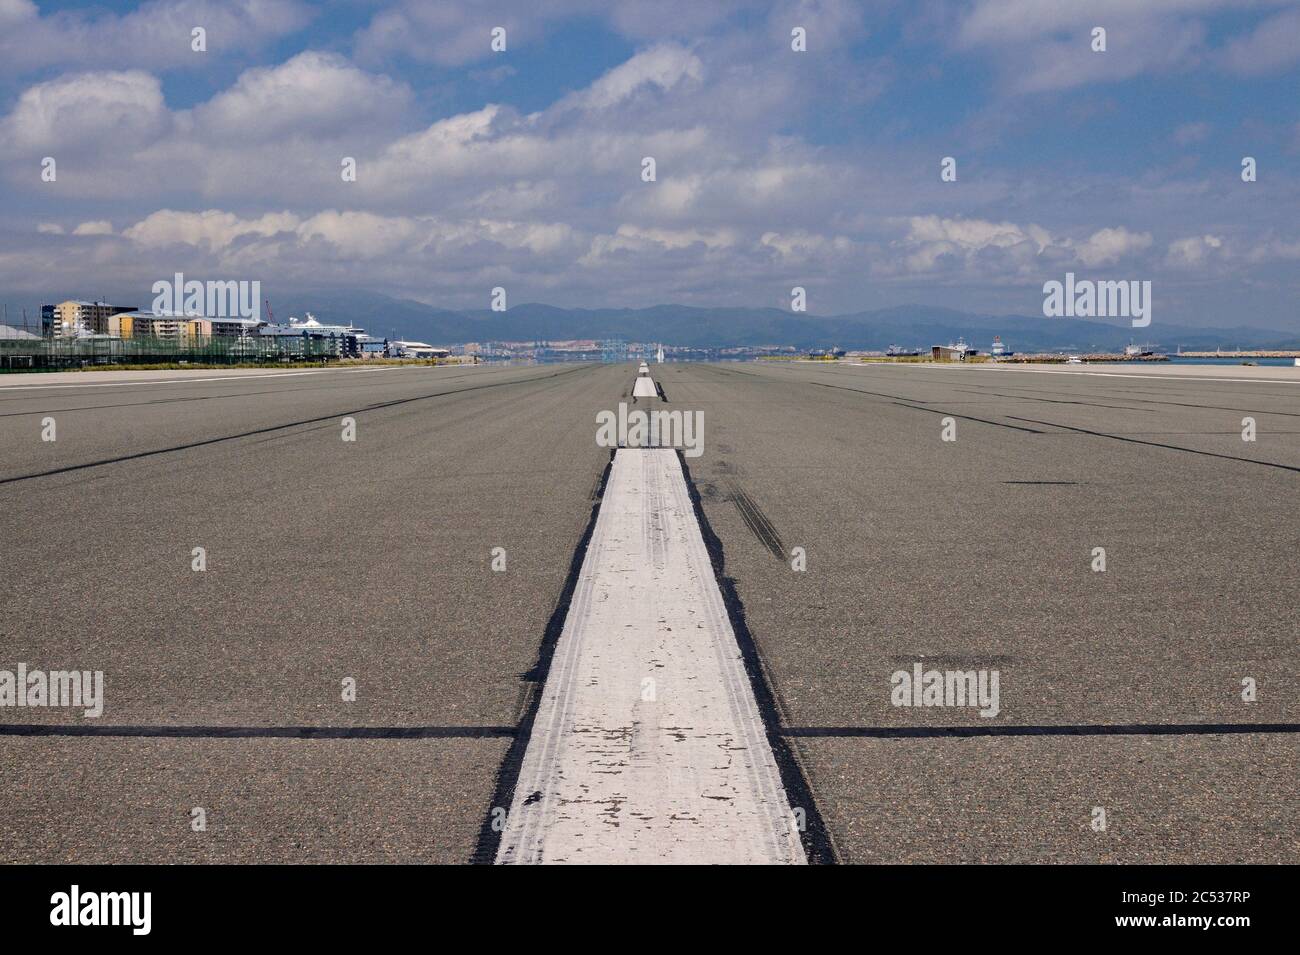 gibraltar, united kingdom - may 20, 2011: the runway of gibraltar airport Stock Photo